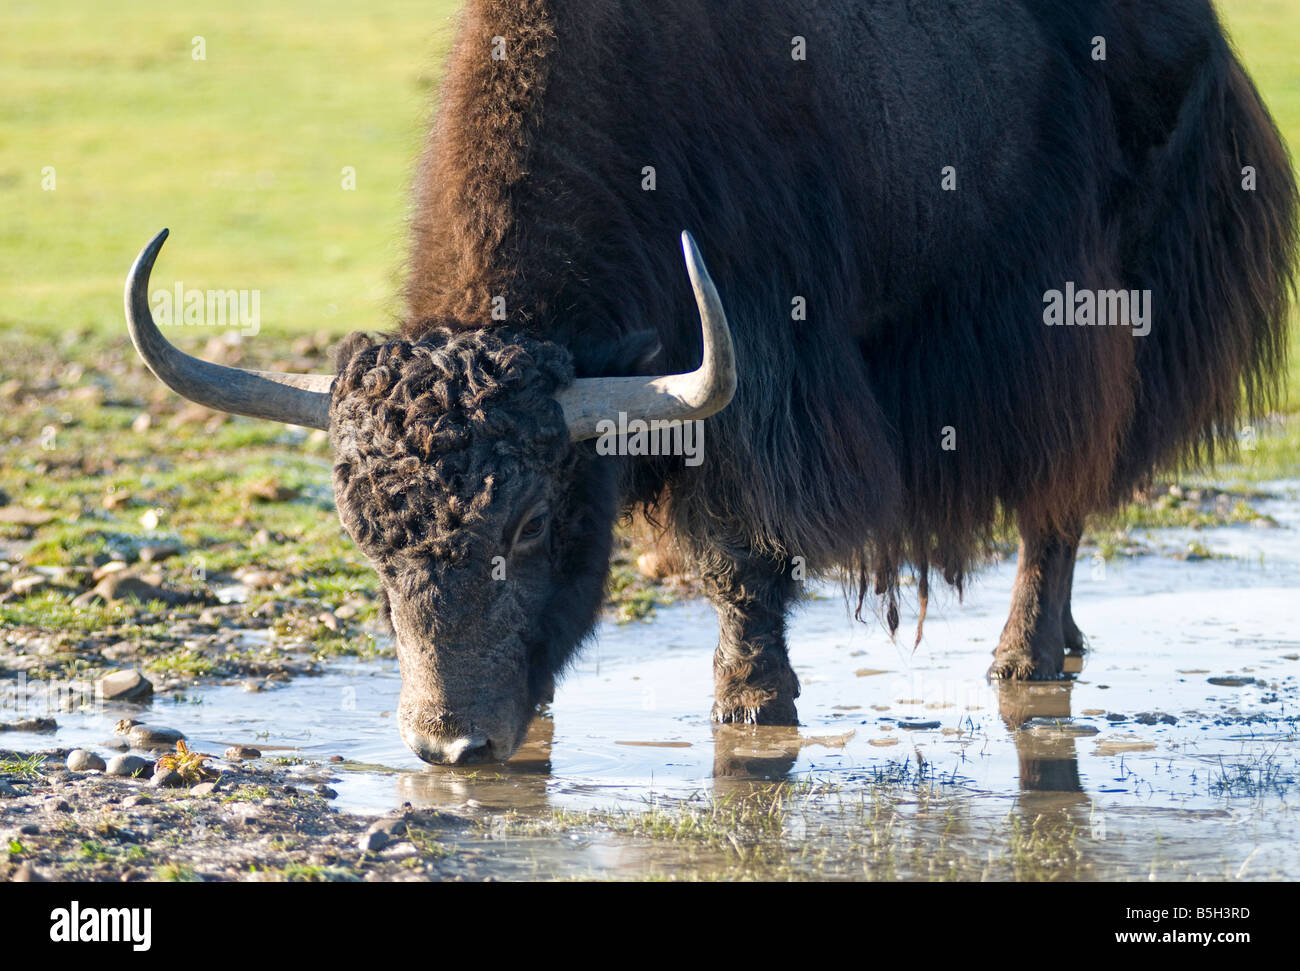 Himalayan Yak Bos grunniens long-haired bovine found throughout the Himalayan region of south Central Asia   SCO 1136 Stock Photo